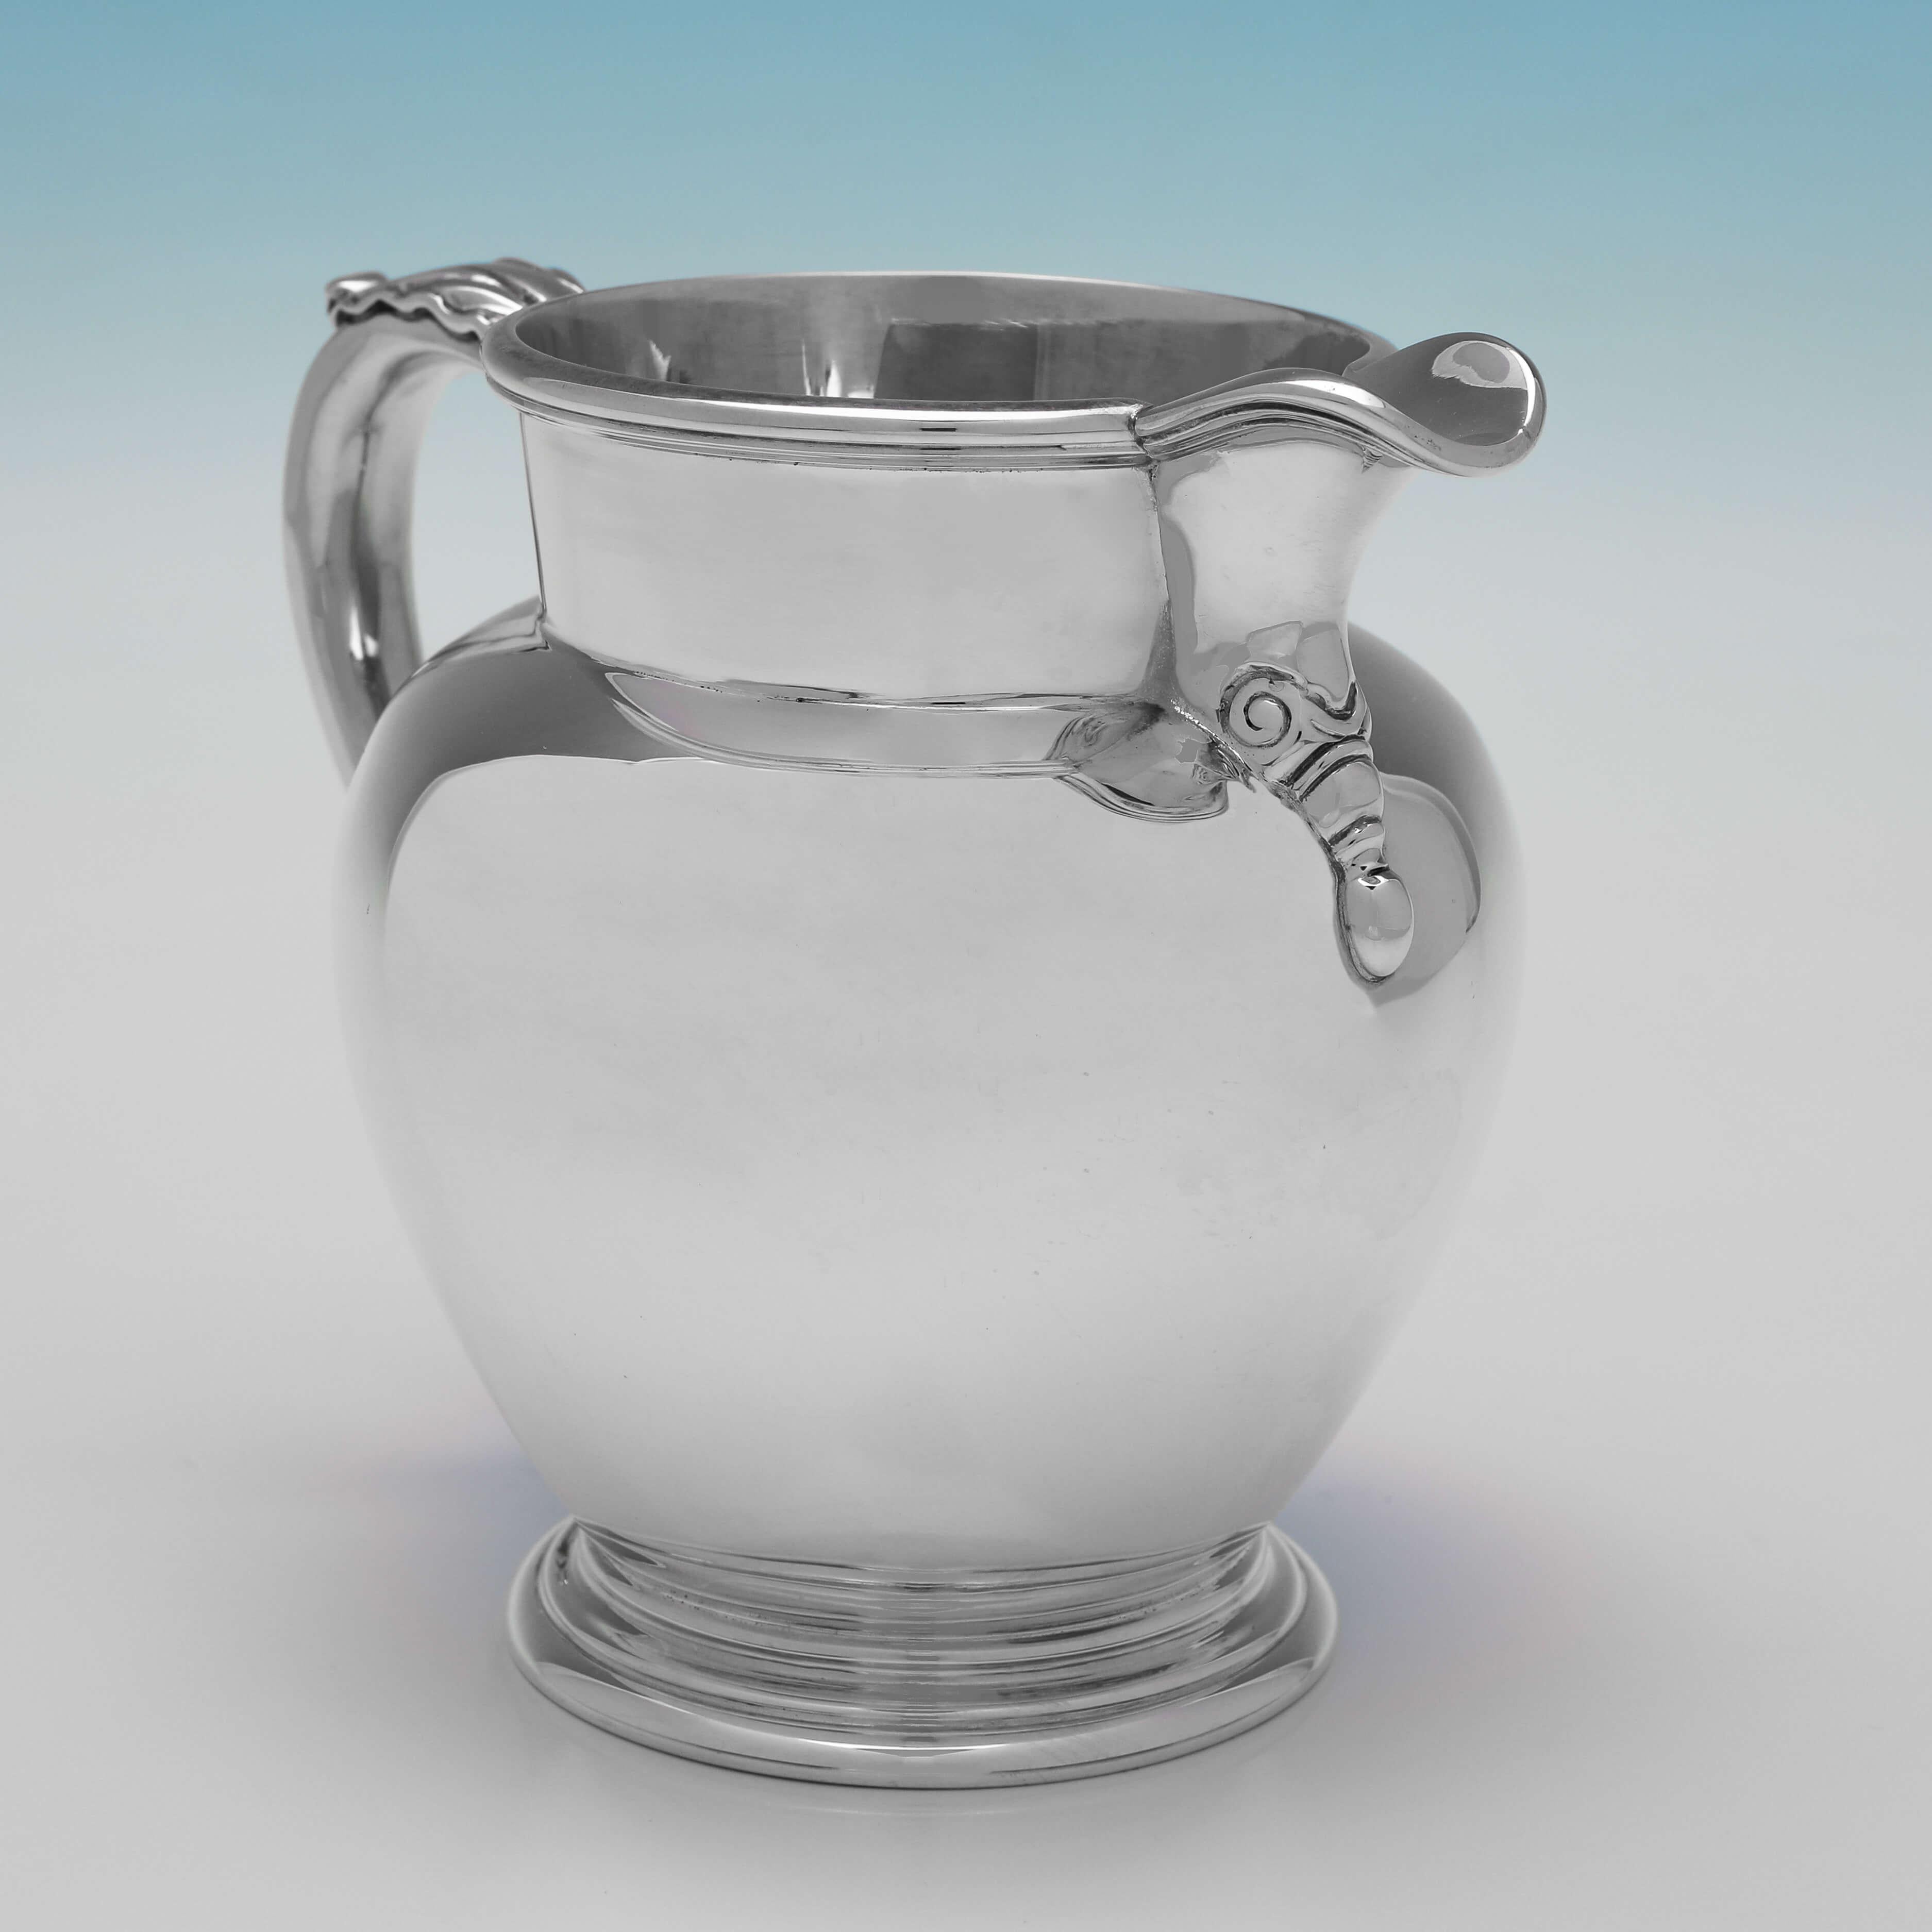 Hallmarked in Sheffield in 1979 by Roberts & Belk, this handsome, Sterling Silver Water Jug, is of traditional design, with reed detailing and an acanthus leaf decorated handle. 

The water jug measures 4.75